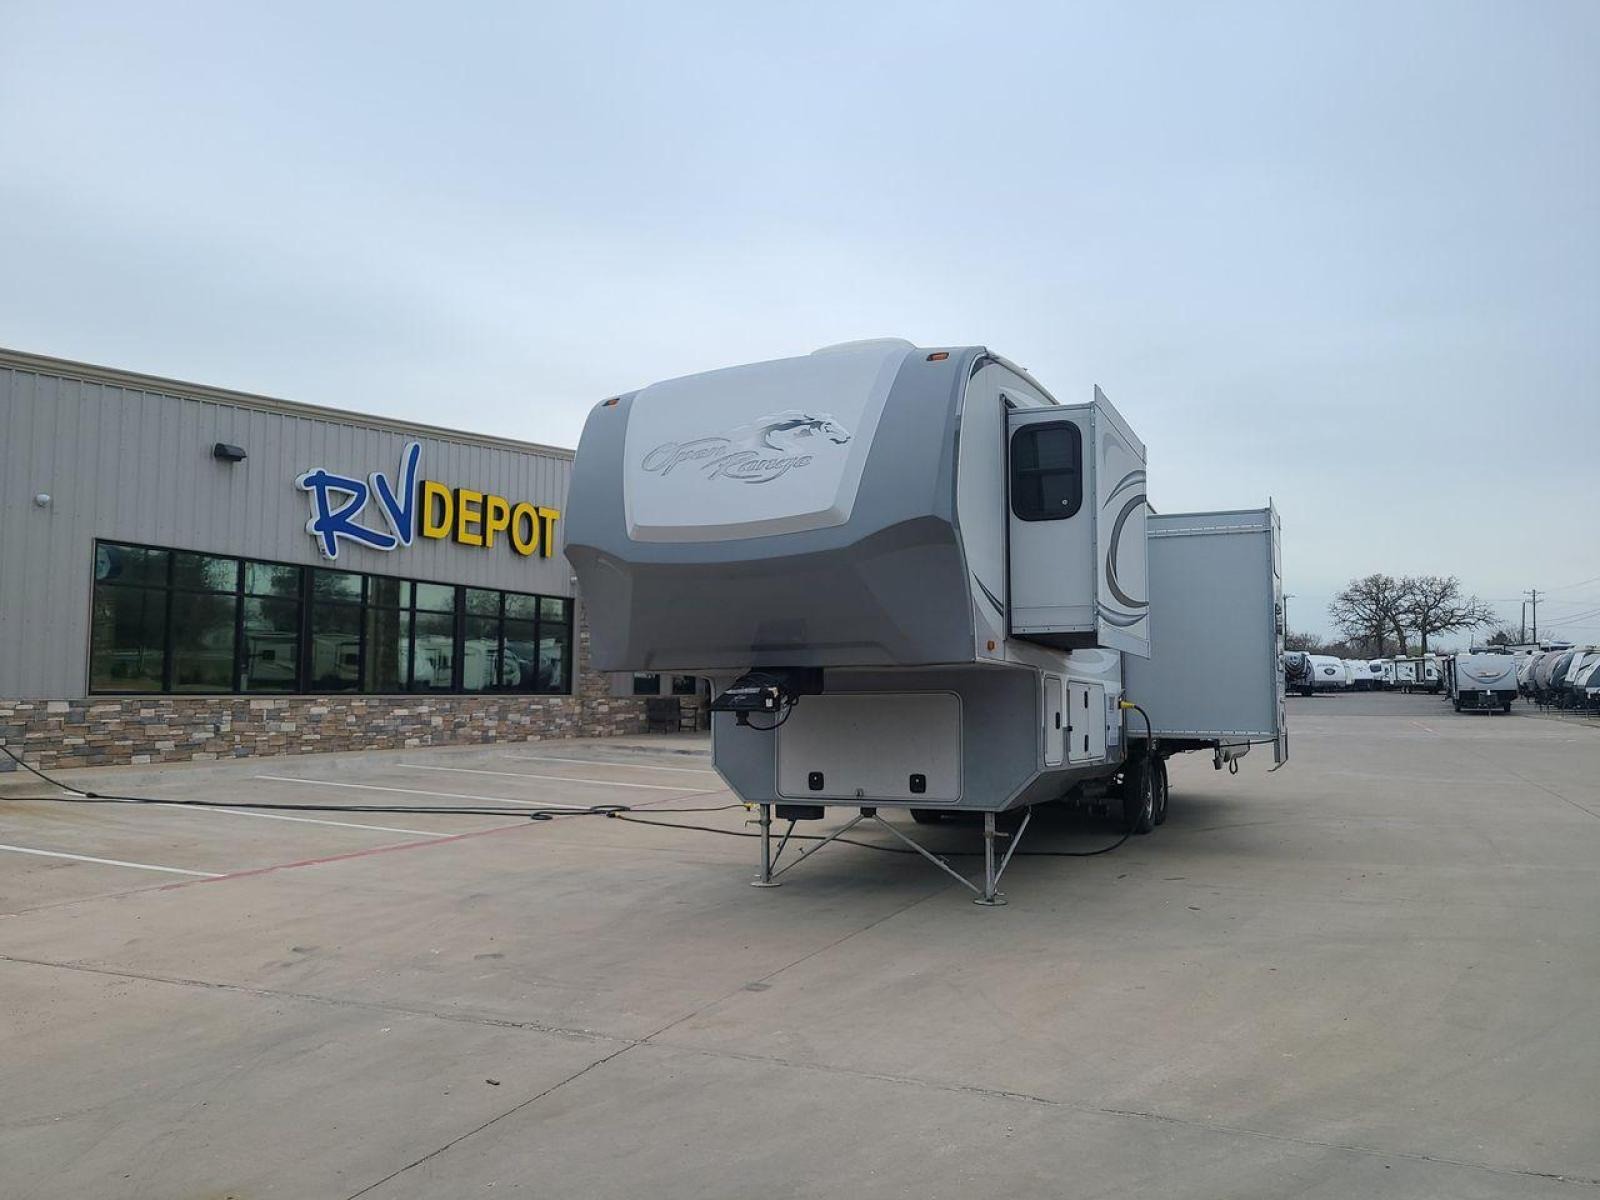 2013 GRAY OPEN RANGE 375BHS - (5XMFE382XD5) , Length: 37.83 ft. | Dry Weight: 10,320 lbs. | Gross Weight: 14,140 lbs. | Slides: 4 transmission, located at 4319 N Main St, Cleburne, TX, 76033, (817) 678-5133, 32.385960, -97.391212 - The 2013 Open Range 375BHS quadruple slide fifth wheel measures just under 38 feet long. It has a dry weight of 10,320 lbs. and a GVWR of 14,140 lbs. It also comes equipped with automatic heating and cooling for optimal temperature control. This fifth wheel has two bedrooms and can sleep up to 8 - Photo #0